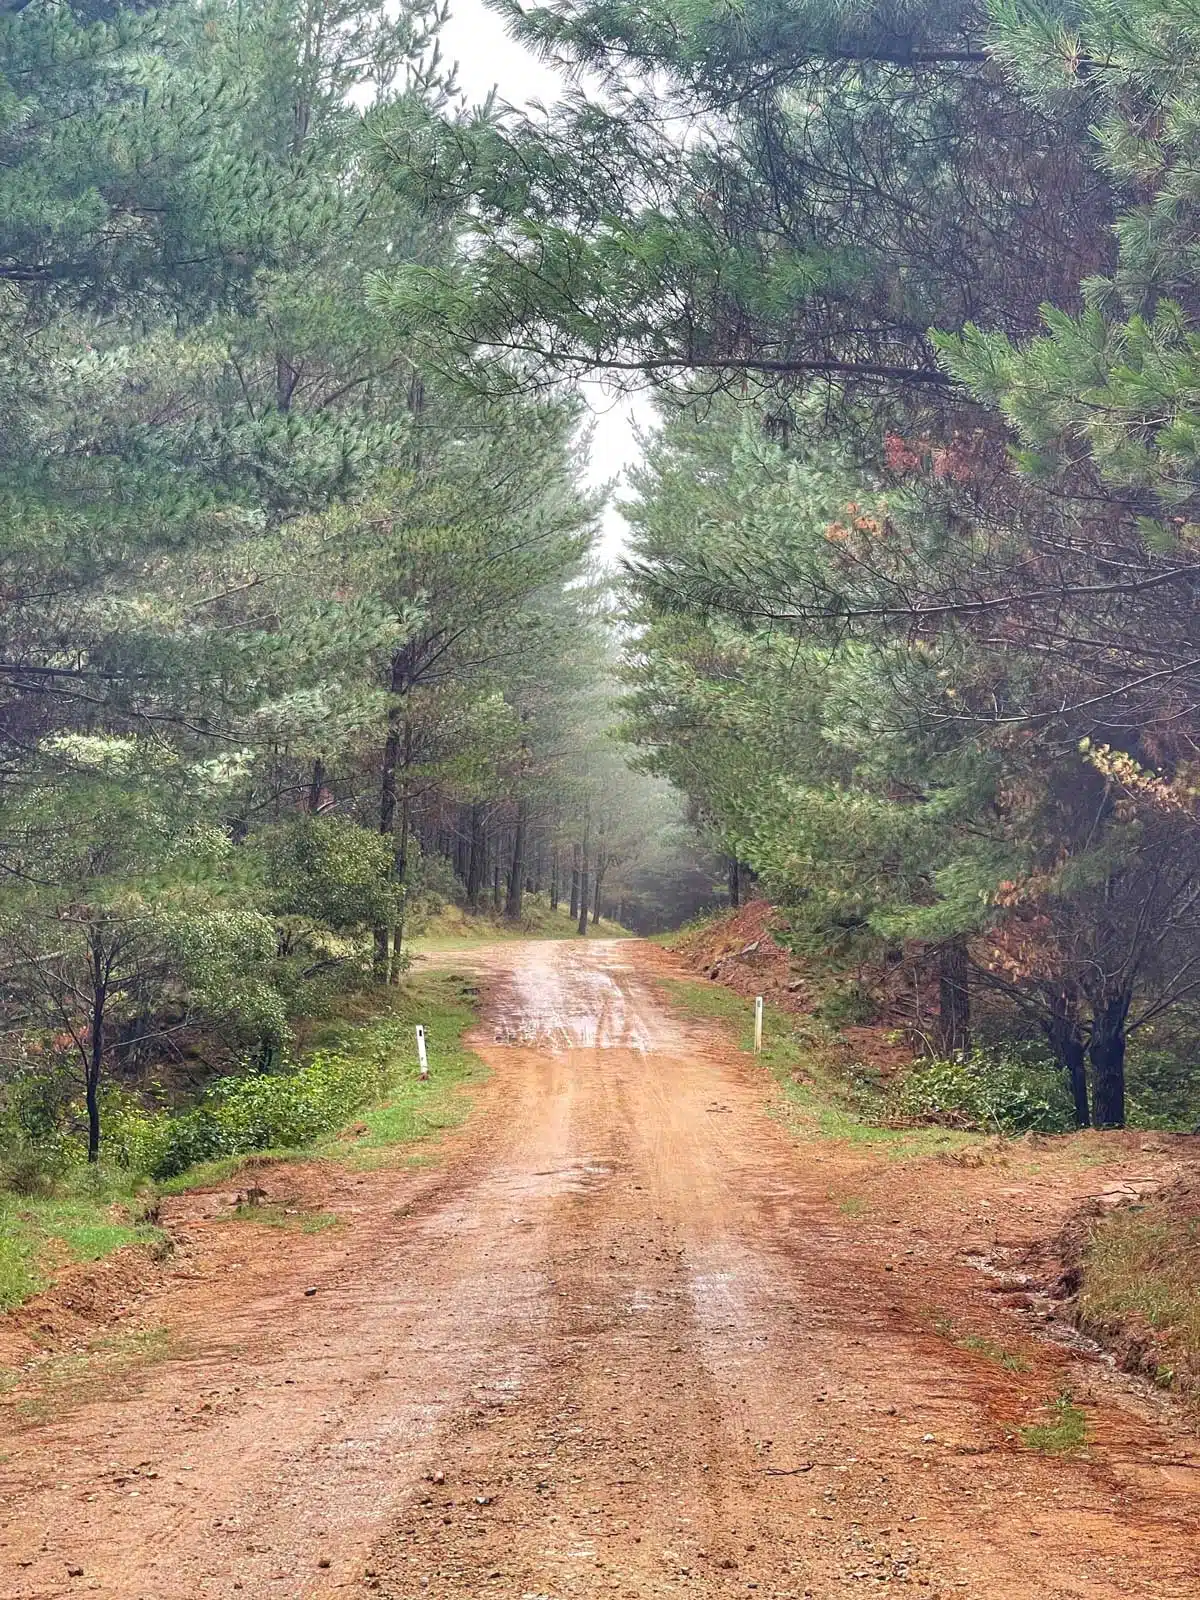 Looking down a dirt road towards a fog after the rain in a pine forest.